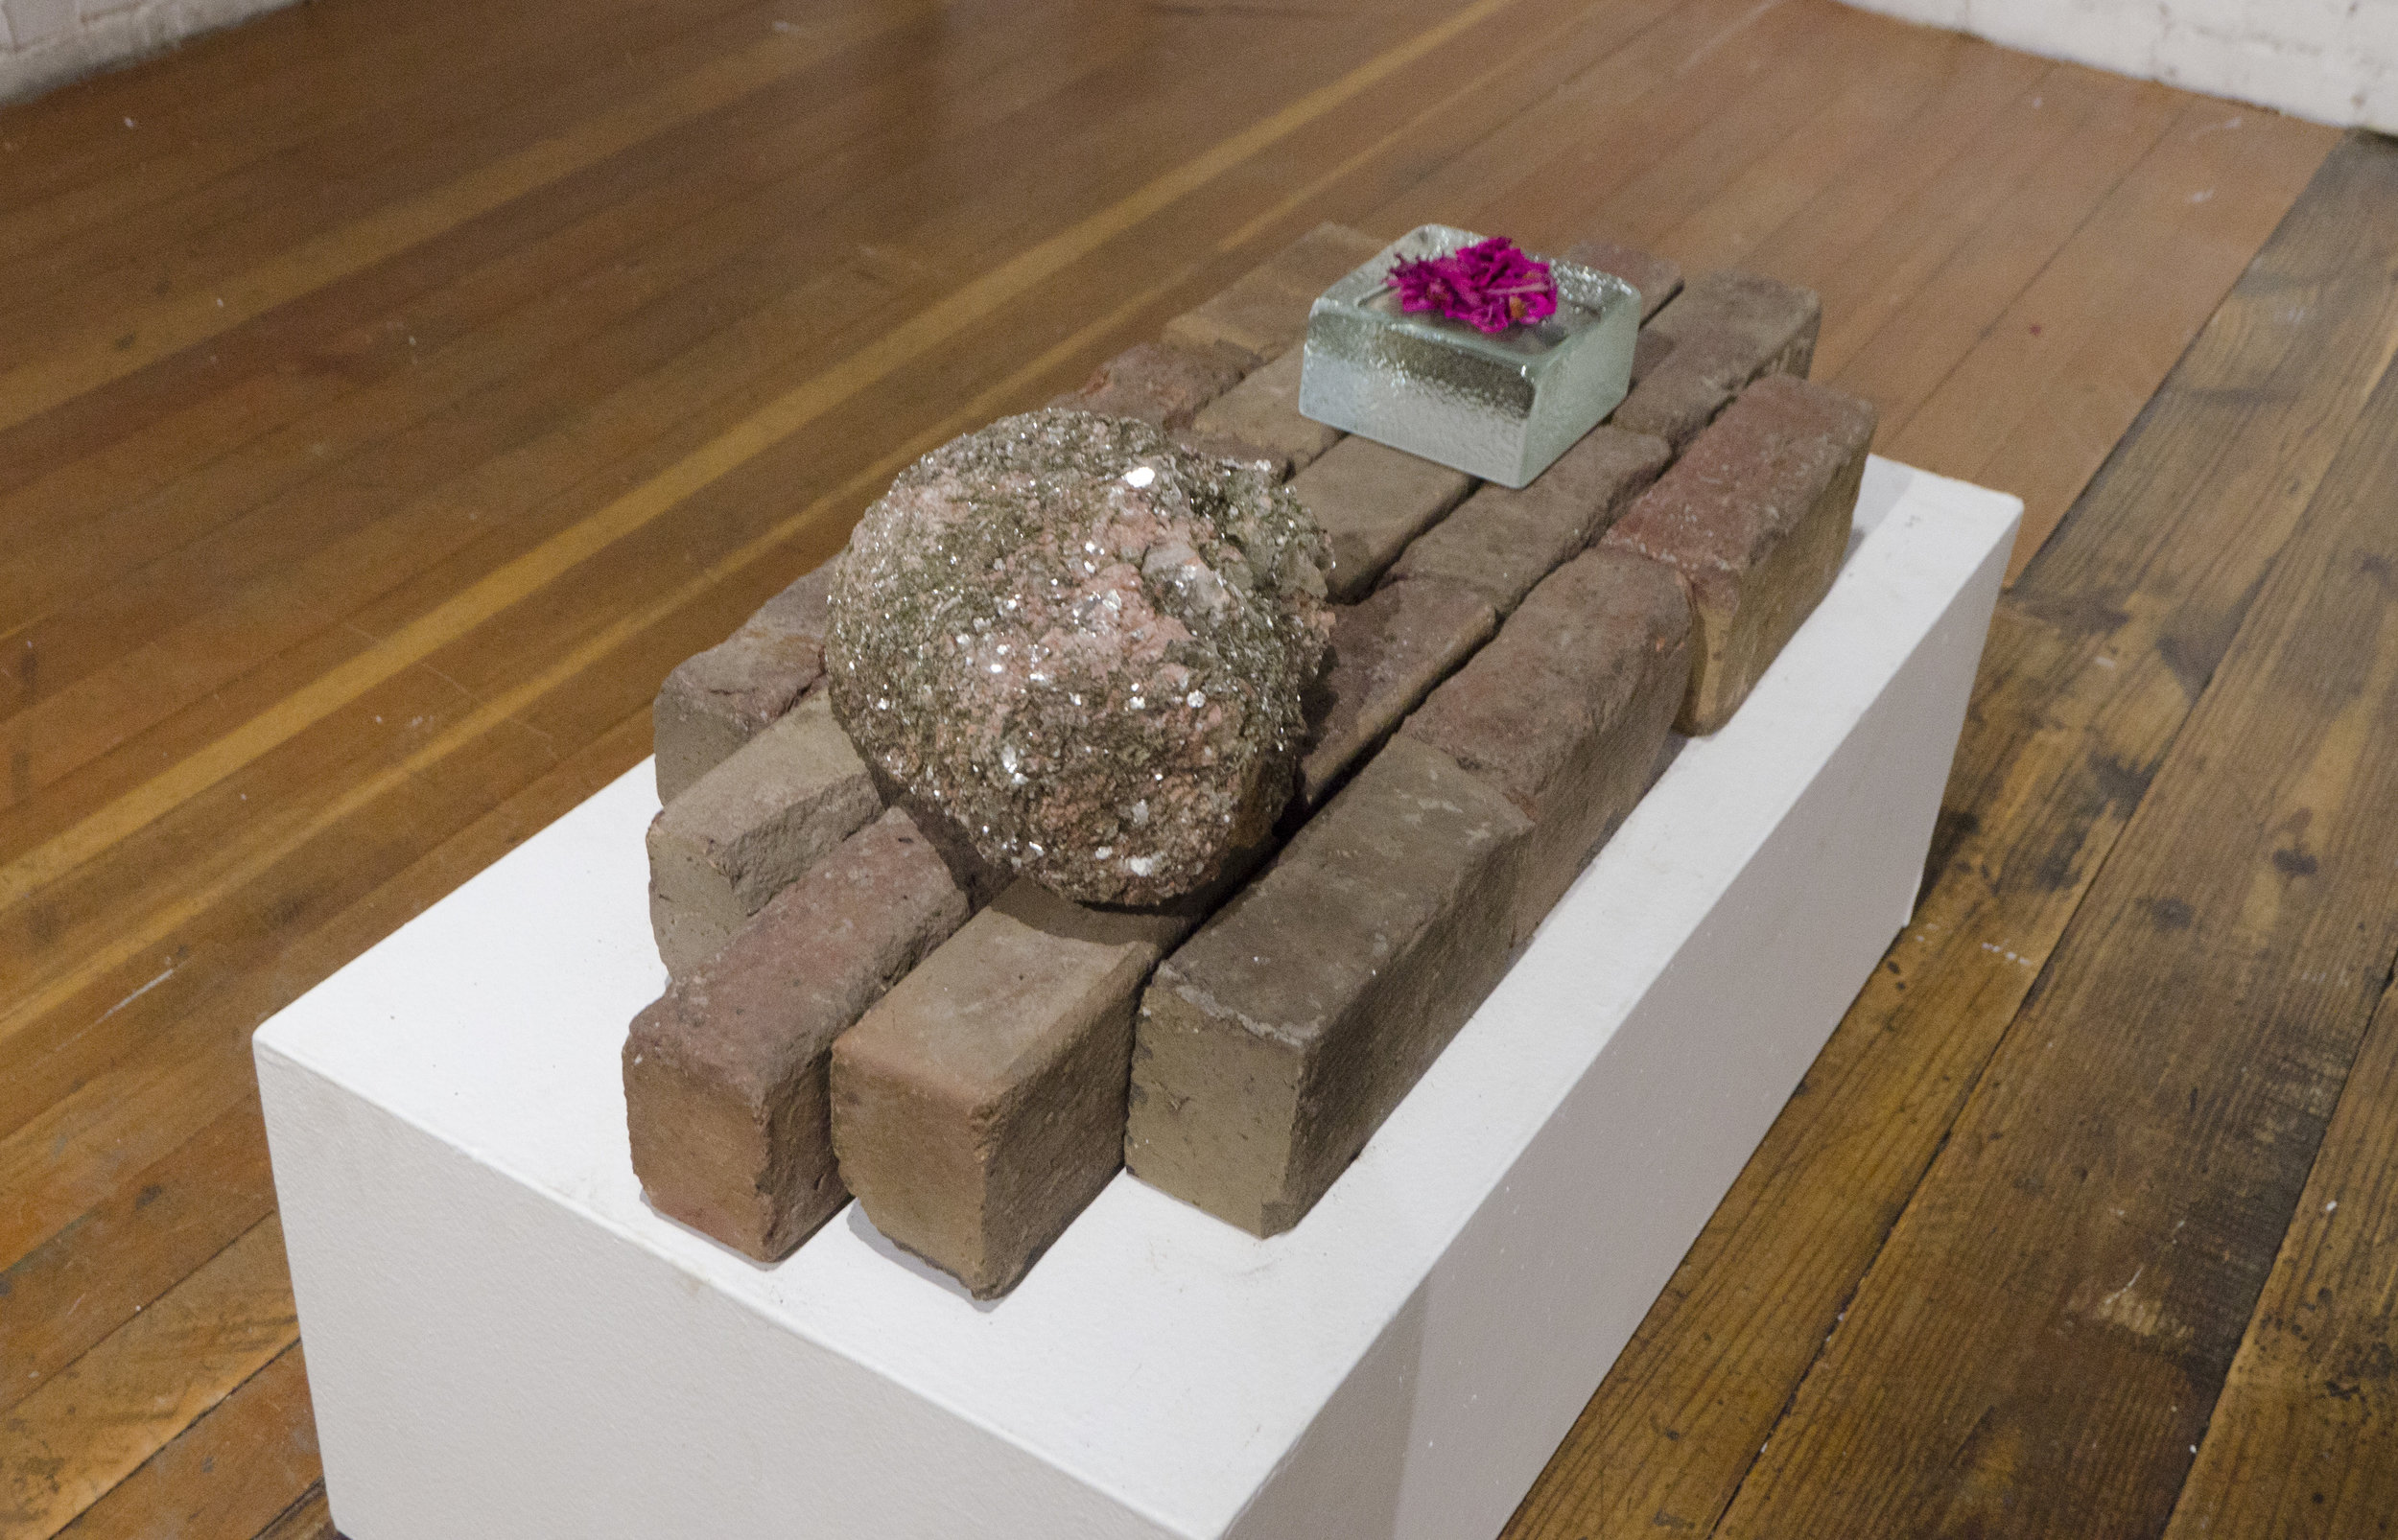   Multi-Faceted    2018   Brick, glass, dried flowers, and fool’s gold    